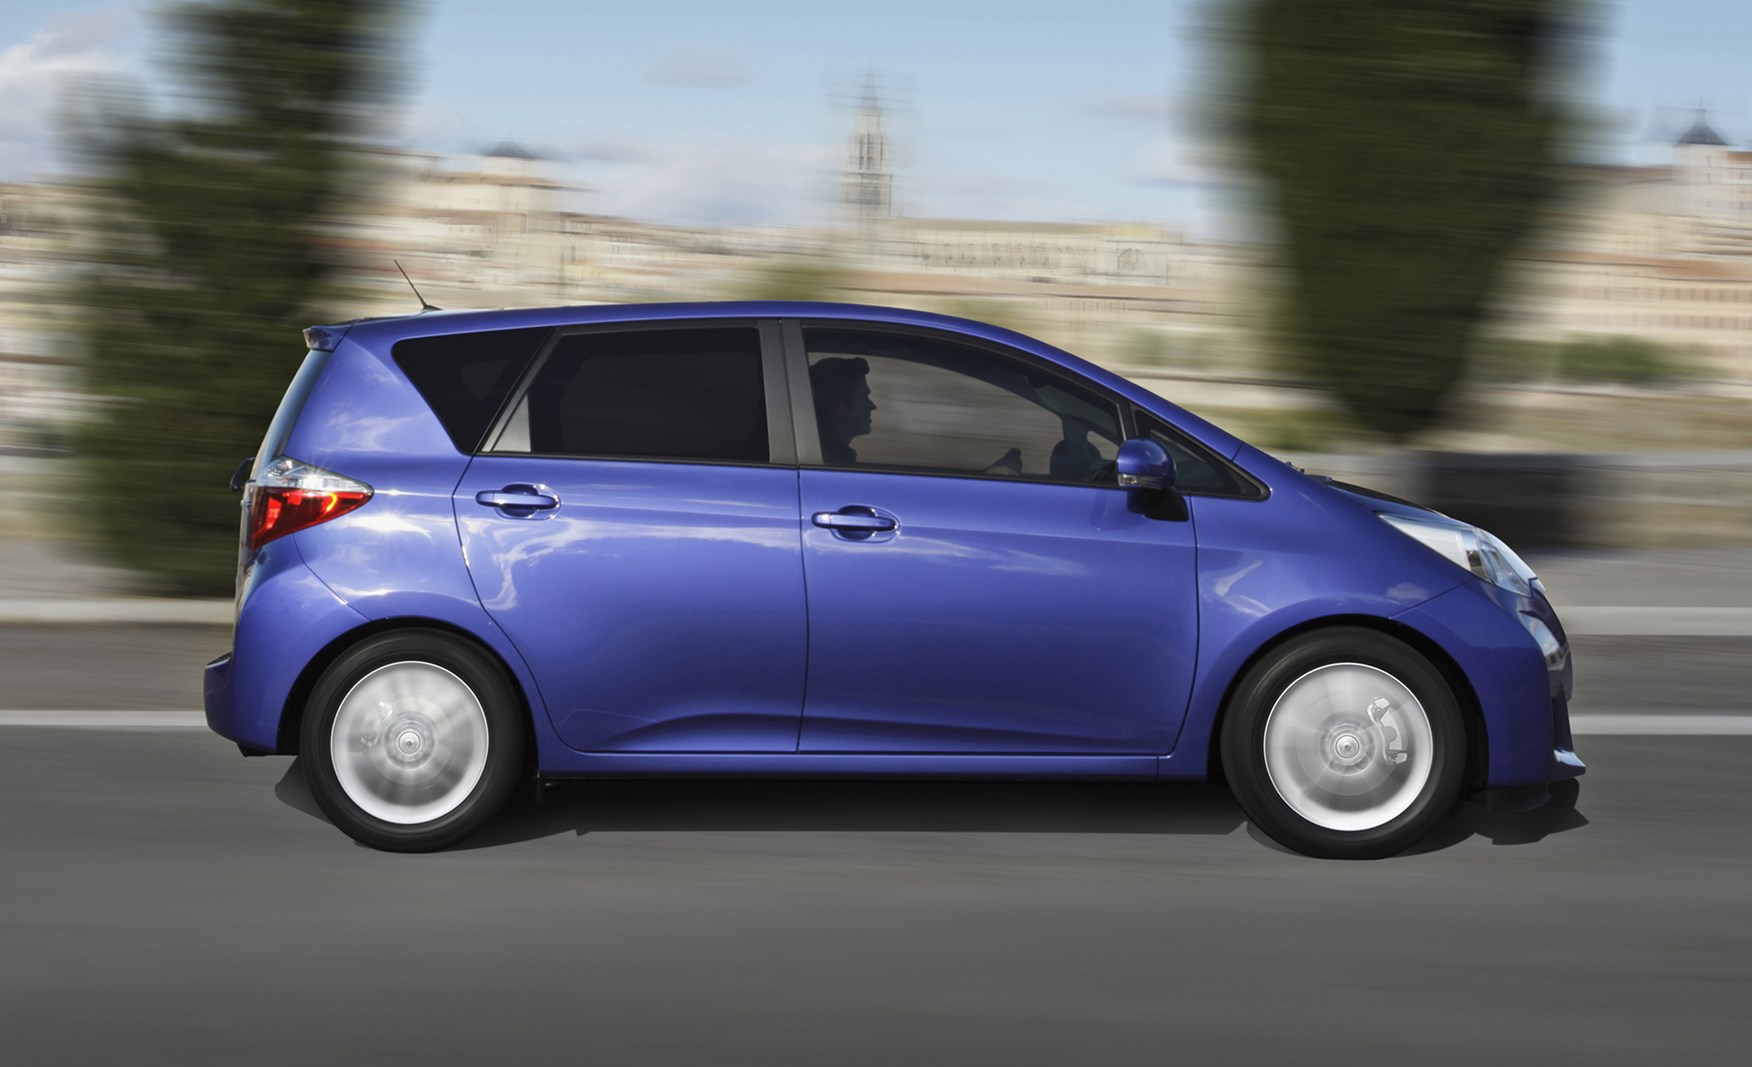 toyota verso s 2011 review